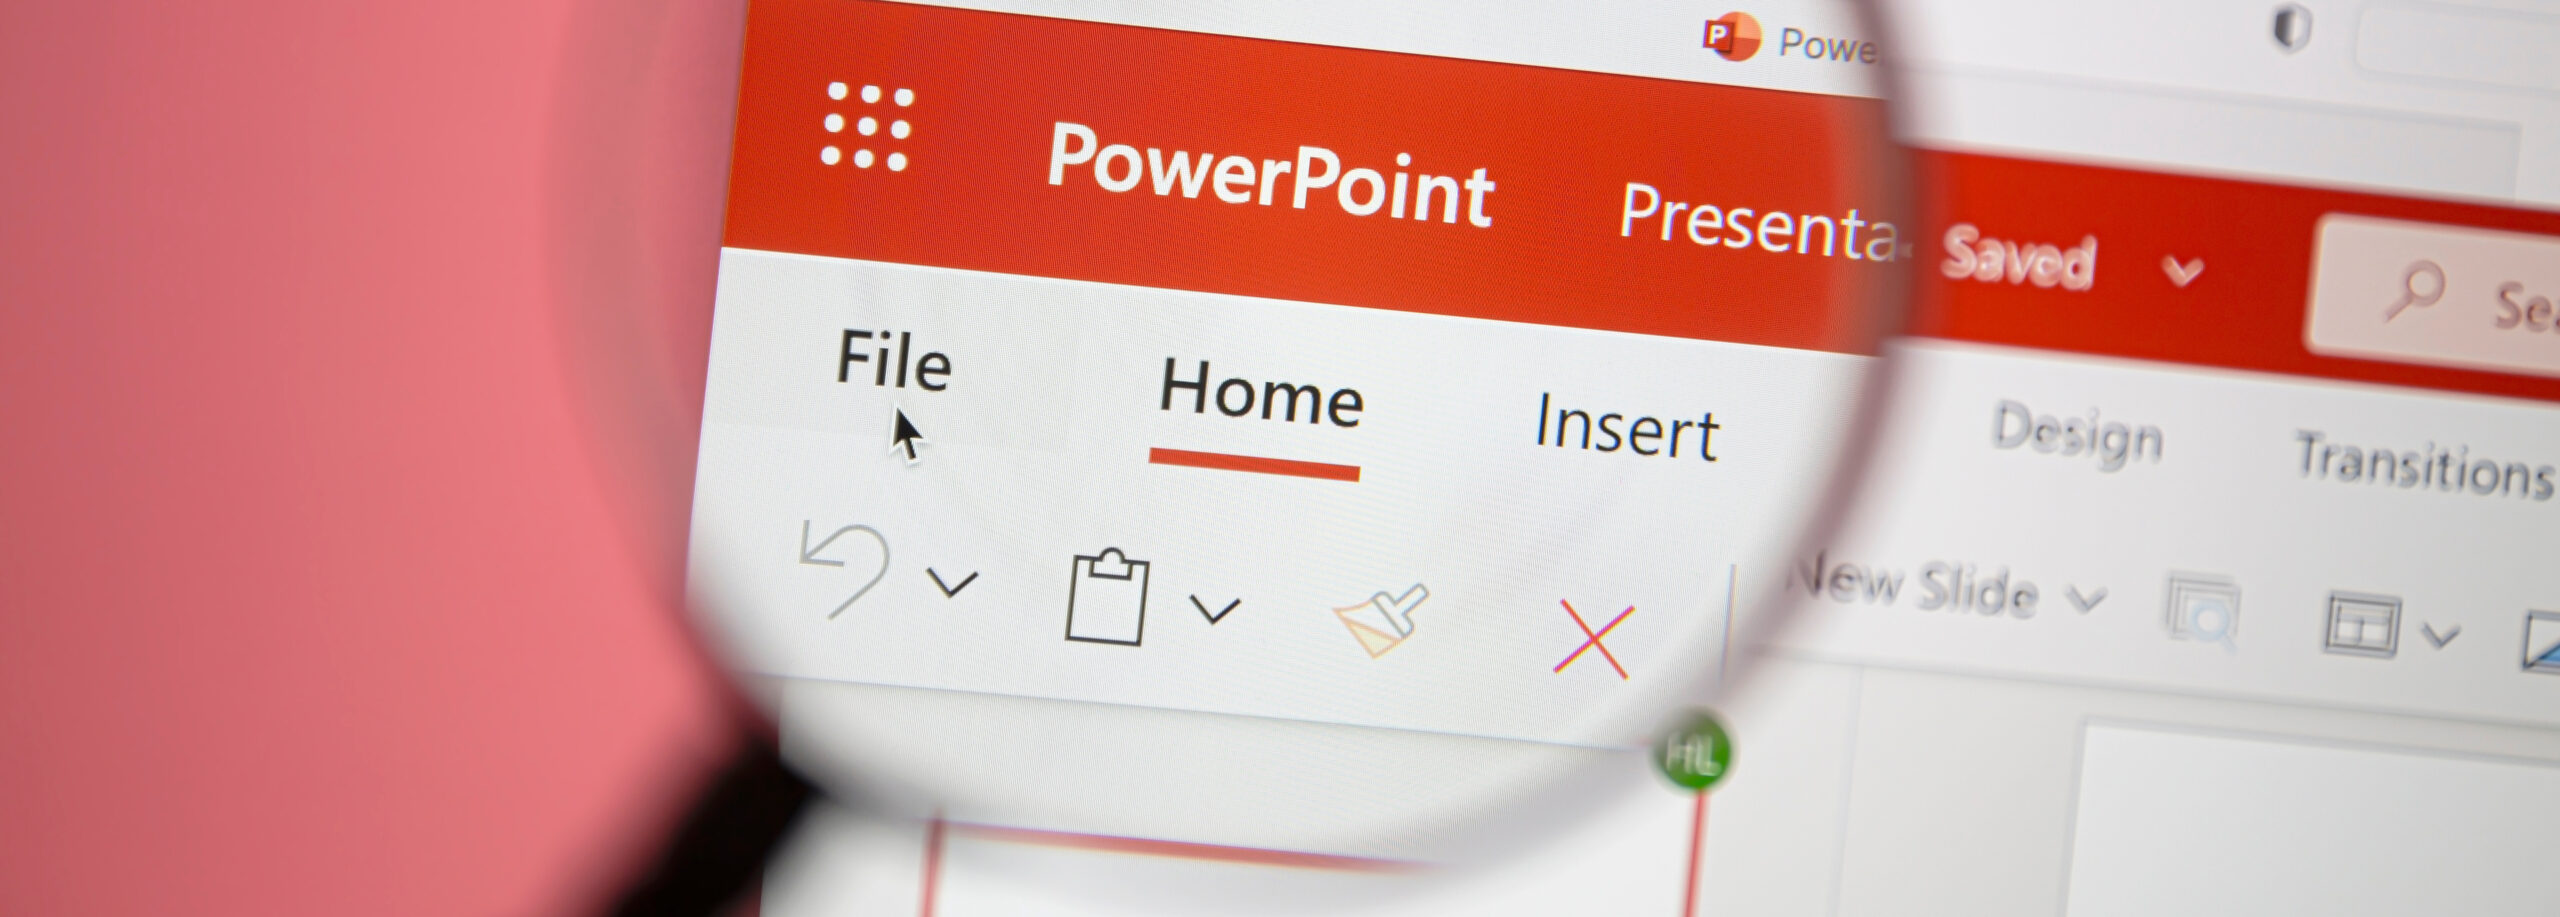 Magnify glass hovering over Microsoft PowerPoint interface home button